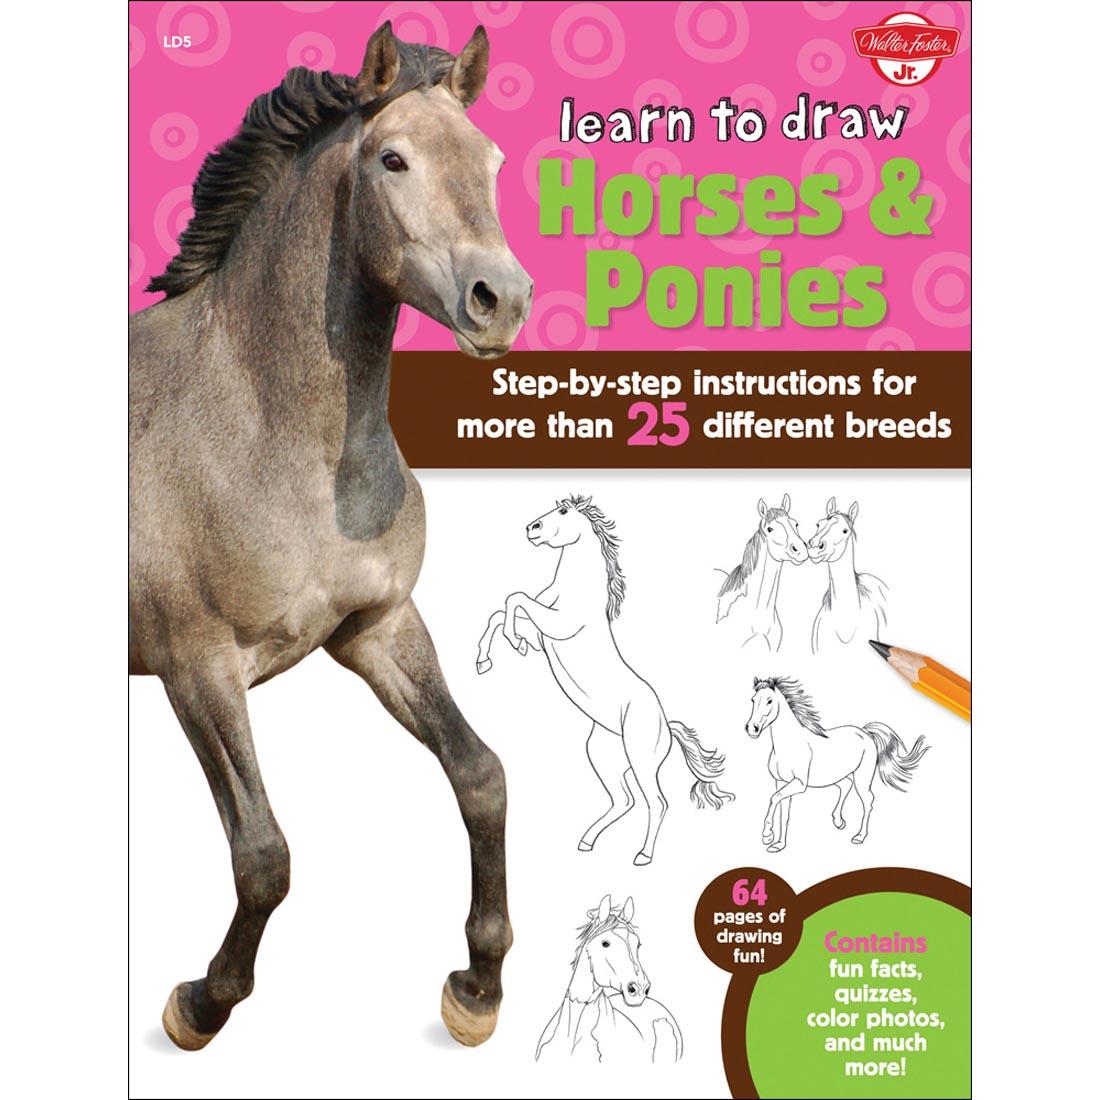 cover of book - Walter Foster Jr. Learn To Draw Horses & Ponies